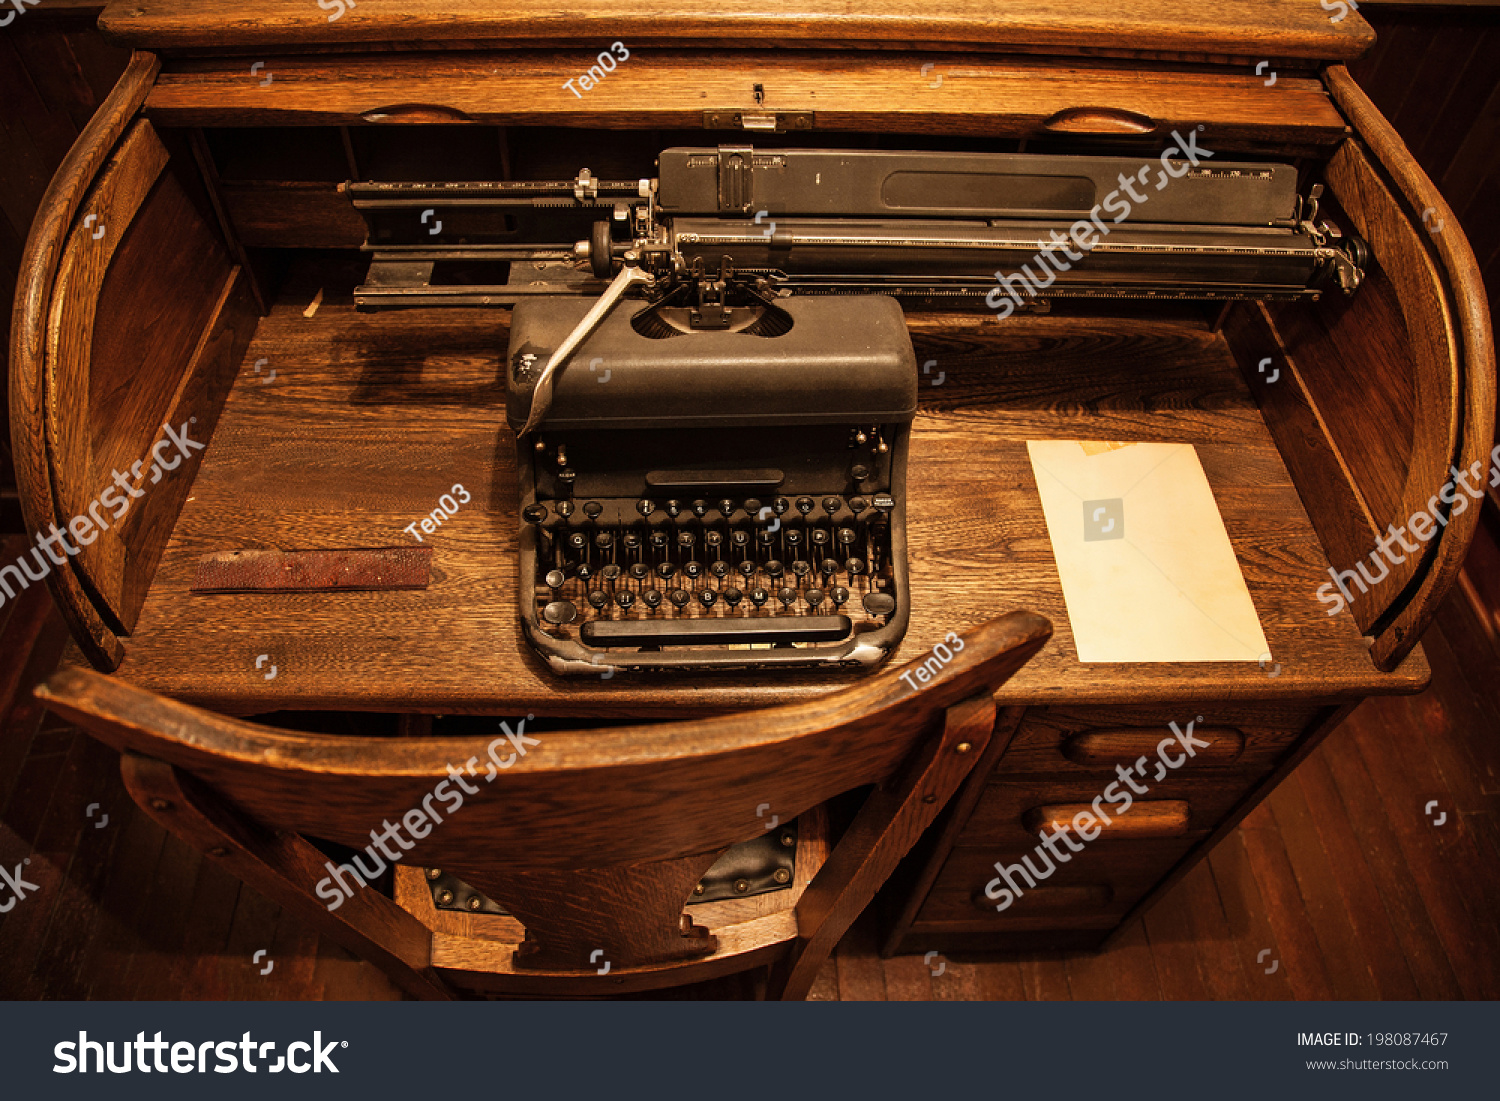 Antique Typewriter On Old Wooden Desk Stock Photo Edit Now 198087467